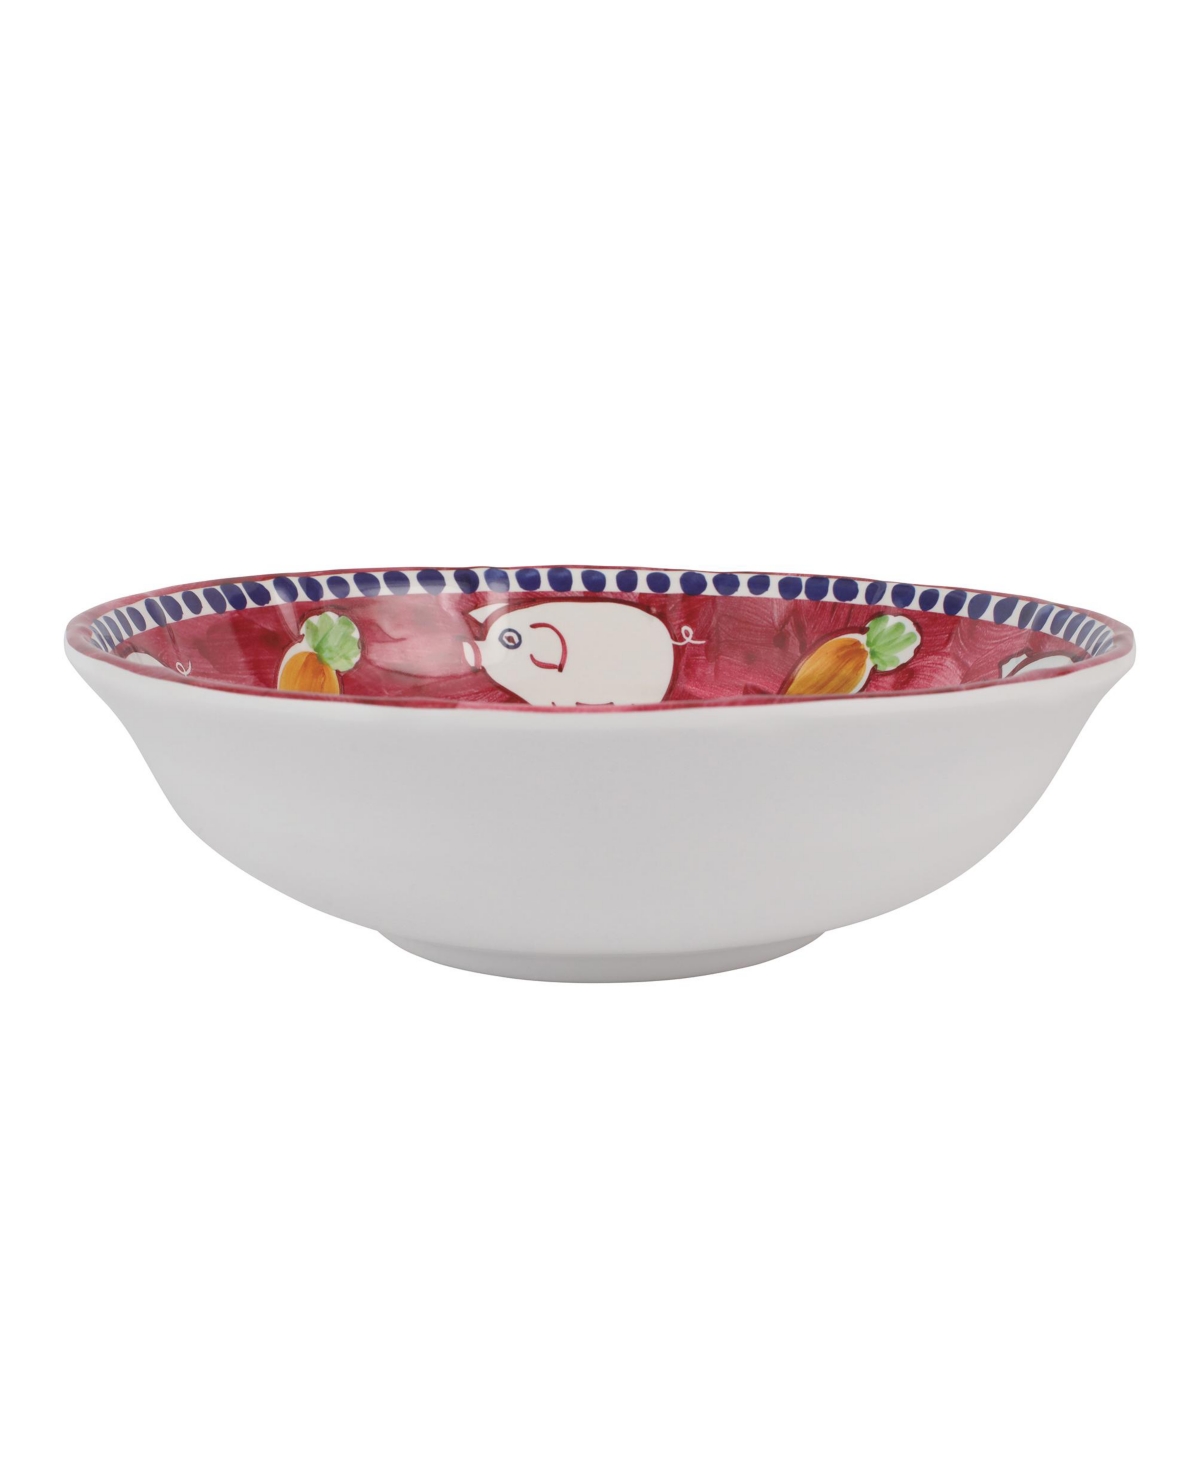 Vietri Melamine Campagna Porco Large Serving Bowl In Open Misce